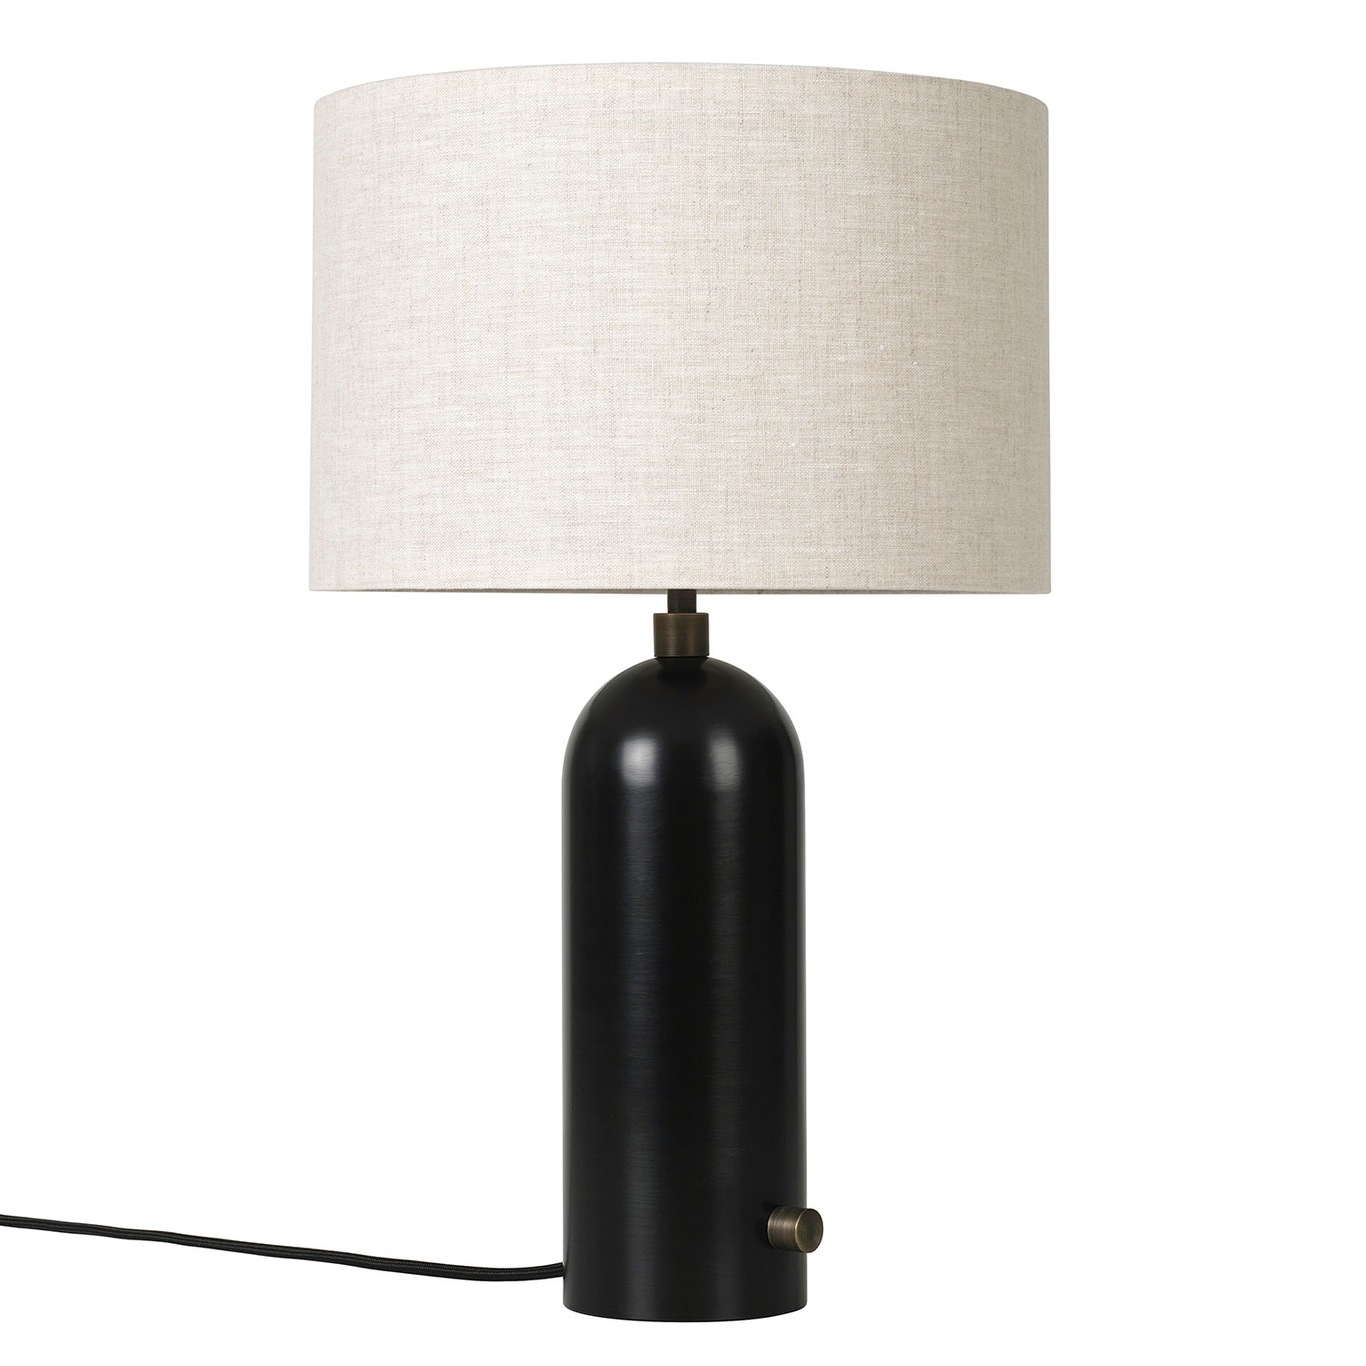 Gravity Table Lamp Small, Black Marble / White